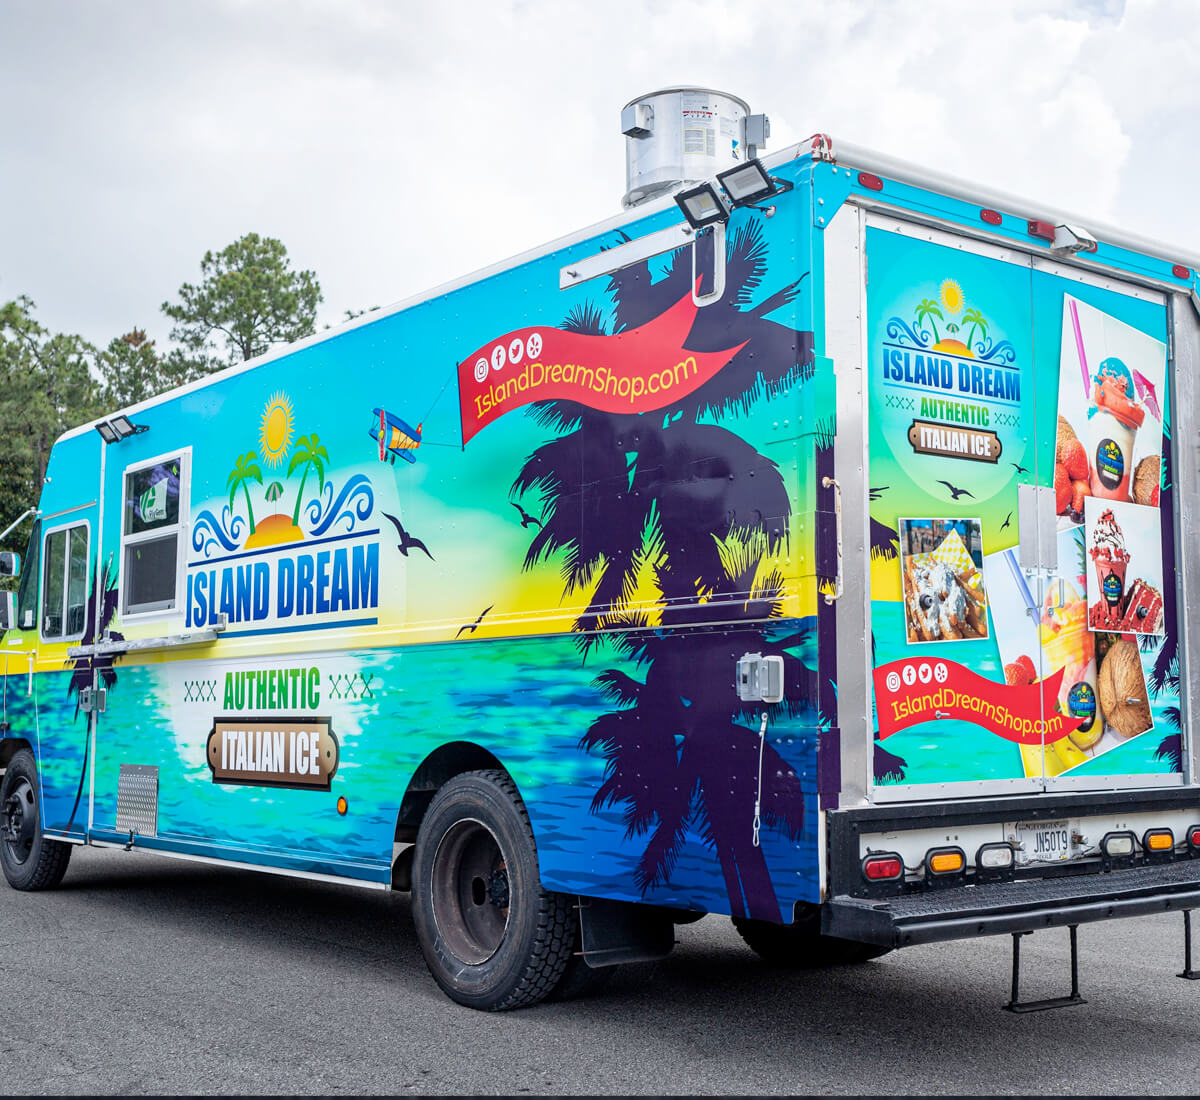 Italian Ice food truck wrapped in graphics